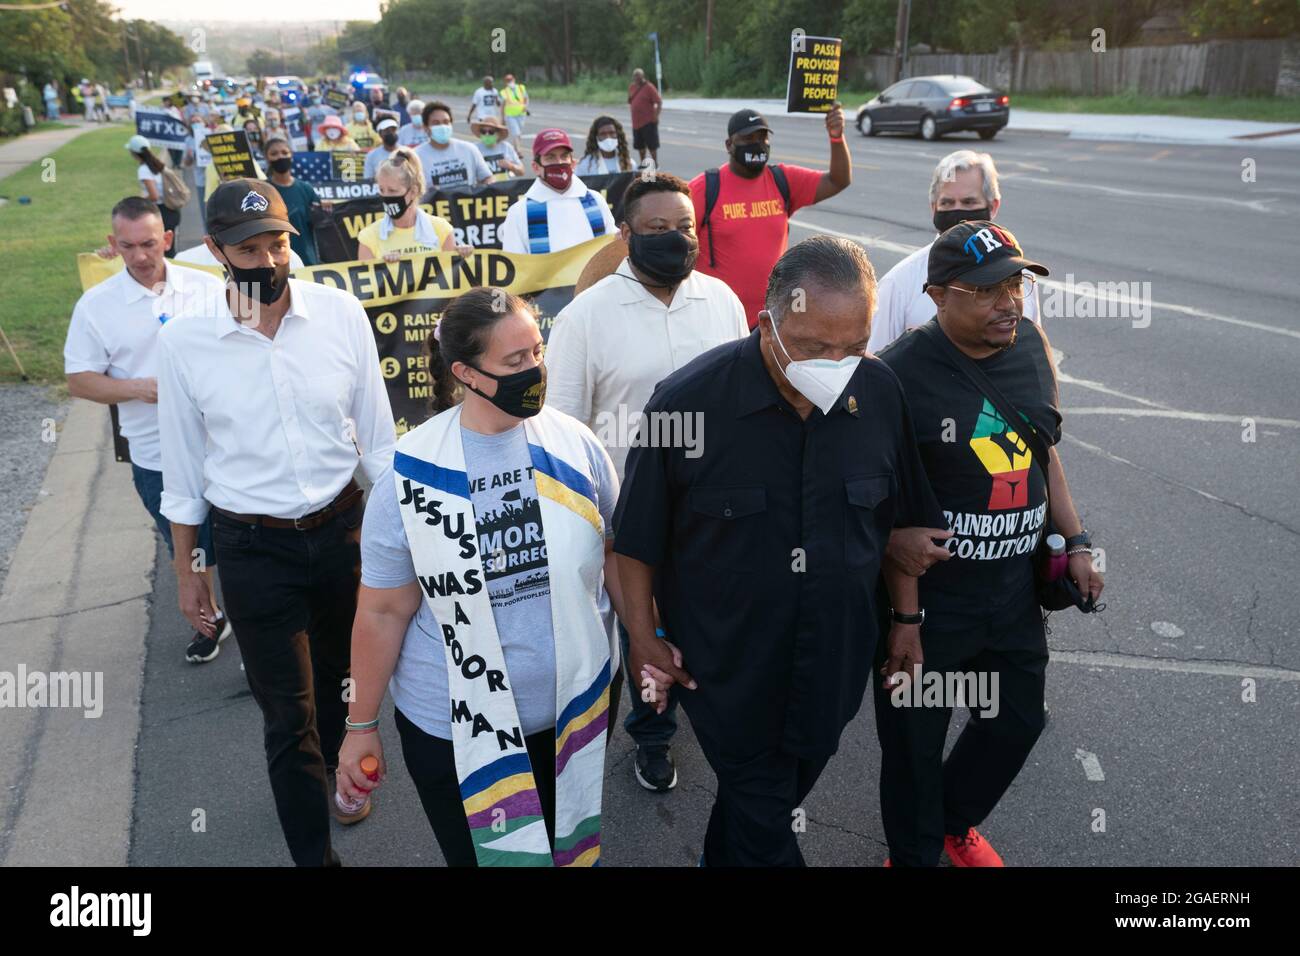 Austin, Texas USA, July 30, 2021: Faith leaders headed by legendary Democratic activist JESSE JACKSON (in black) as voting rights groups march toward the Texas Capitol from north Austin on the third day of a 30-mile journey protesting Republican efforts to suppress votes nationwide and in Texas. Former Texas congressman and voting rights activist Beto O'Rourke is on the left side of the second row. Credit: Bob Daemmrich/Alamy Live News Stock Photo